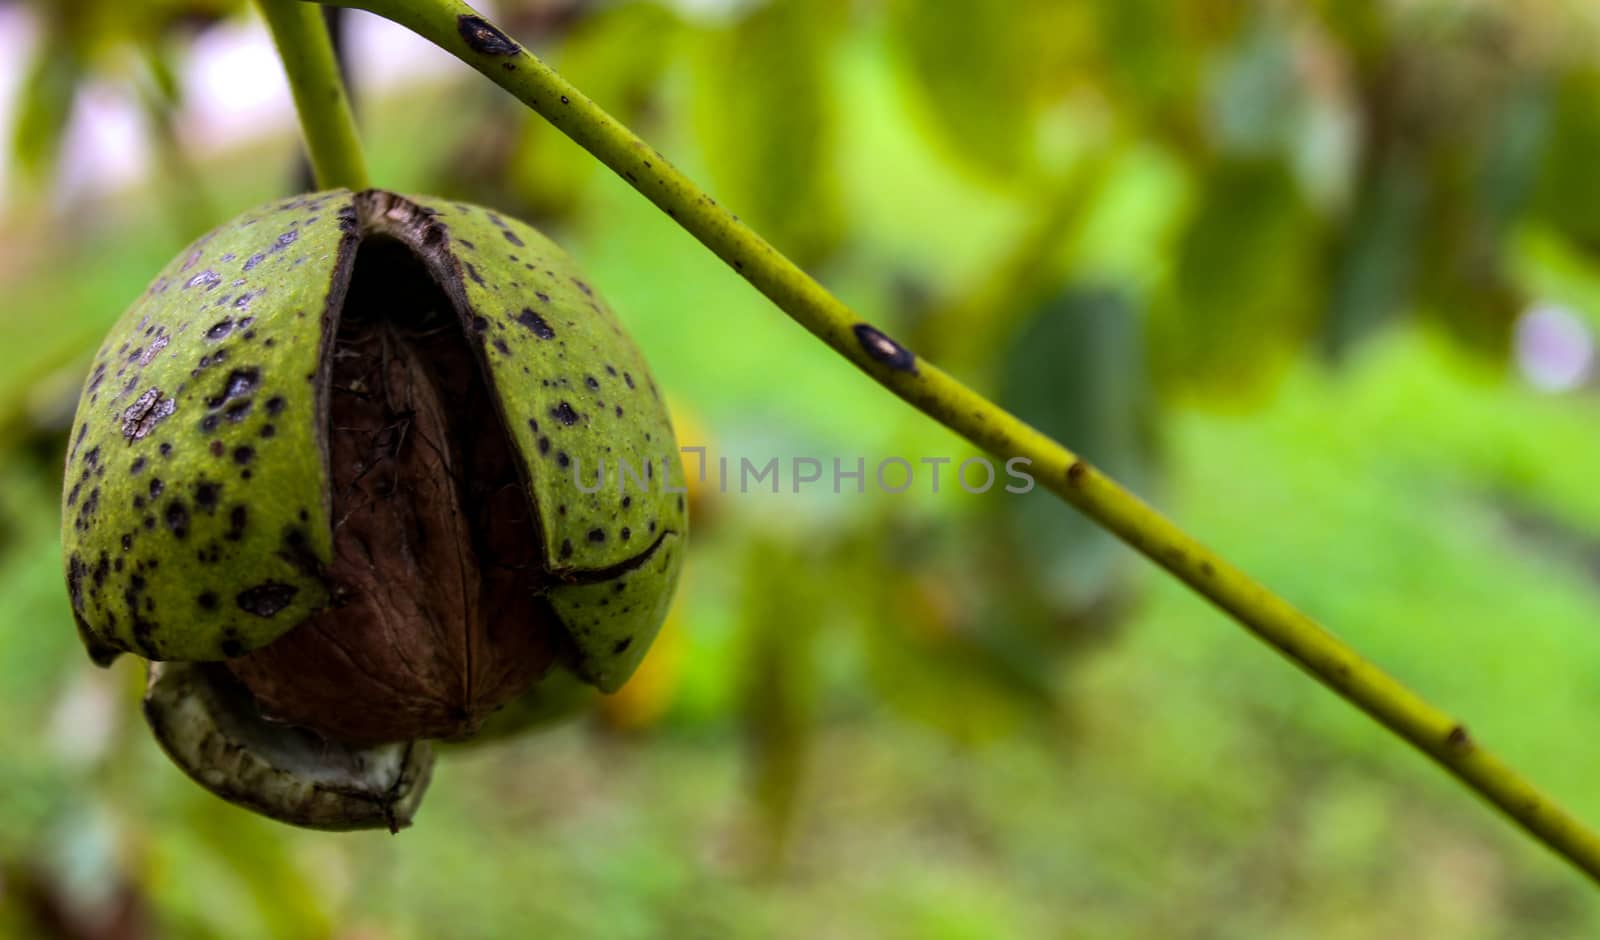 A cracked green shell from which a walnut can be seen. Walnut banner on the branches. by mahirrov